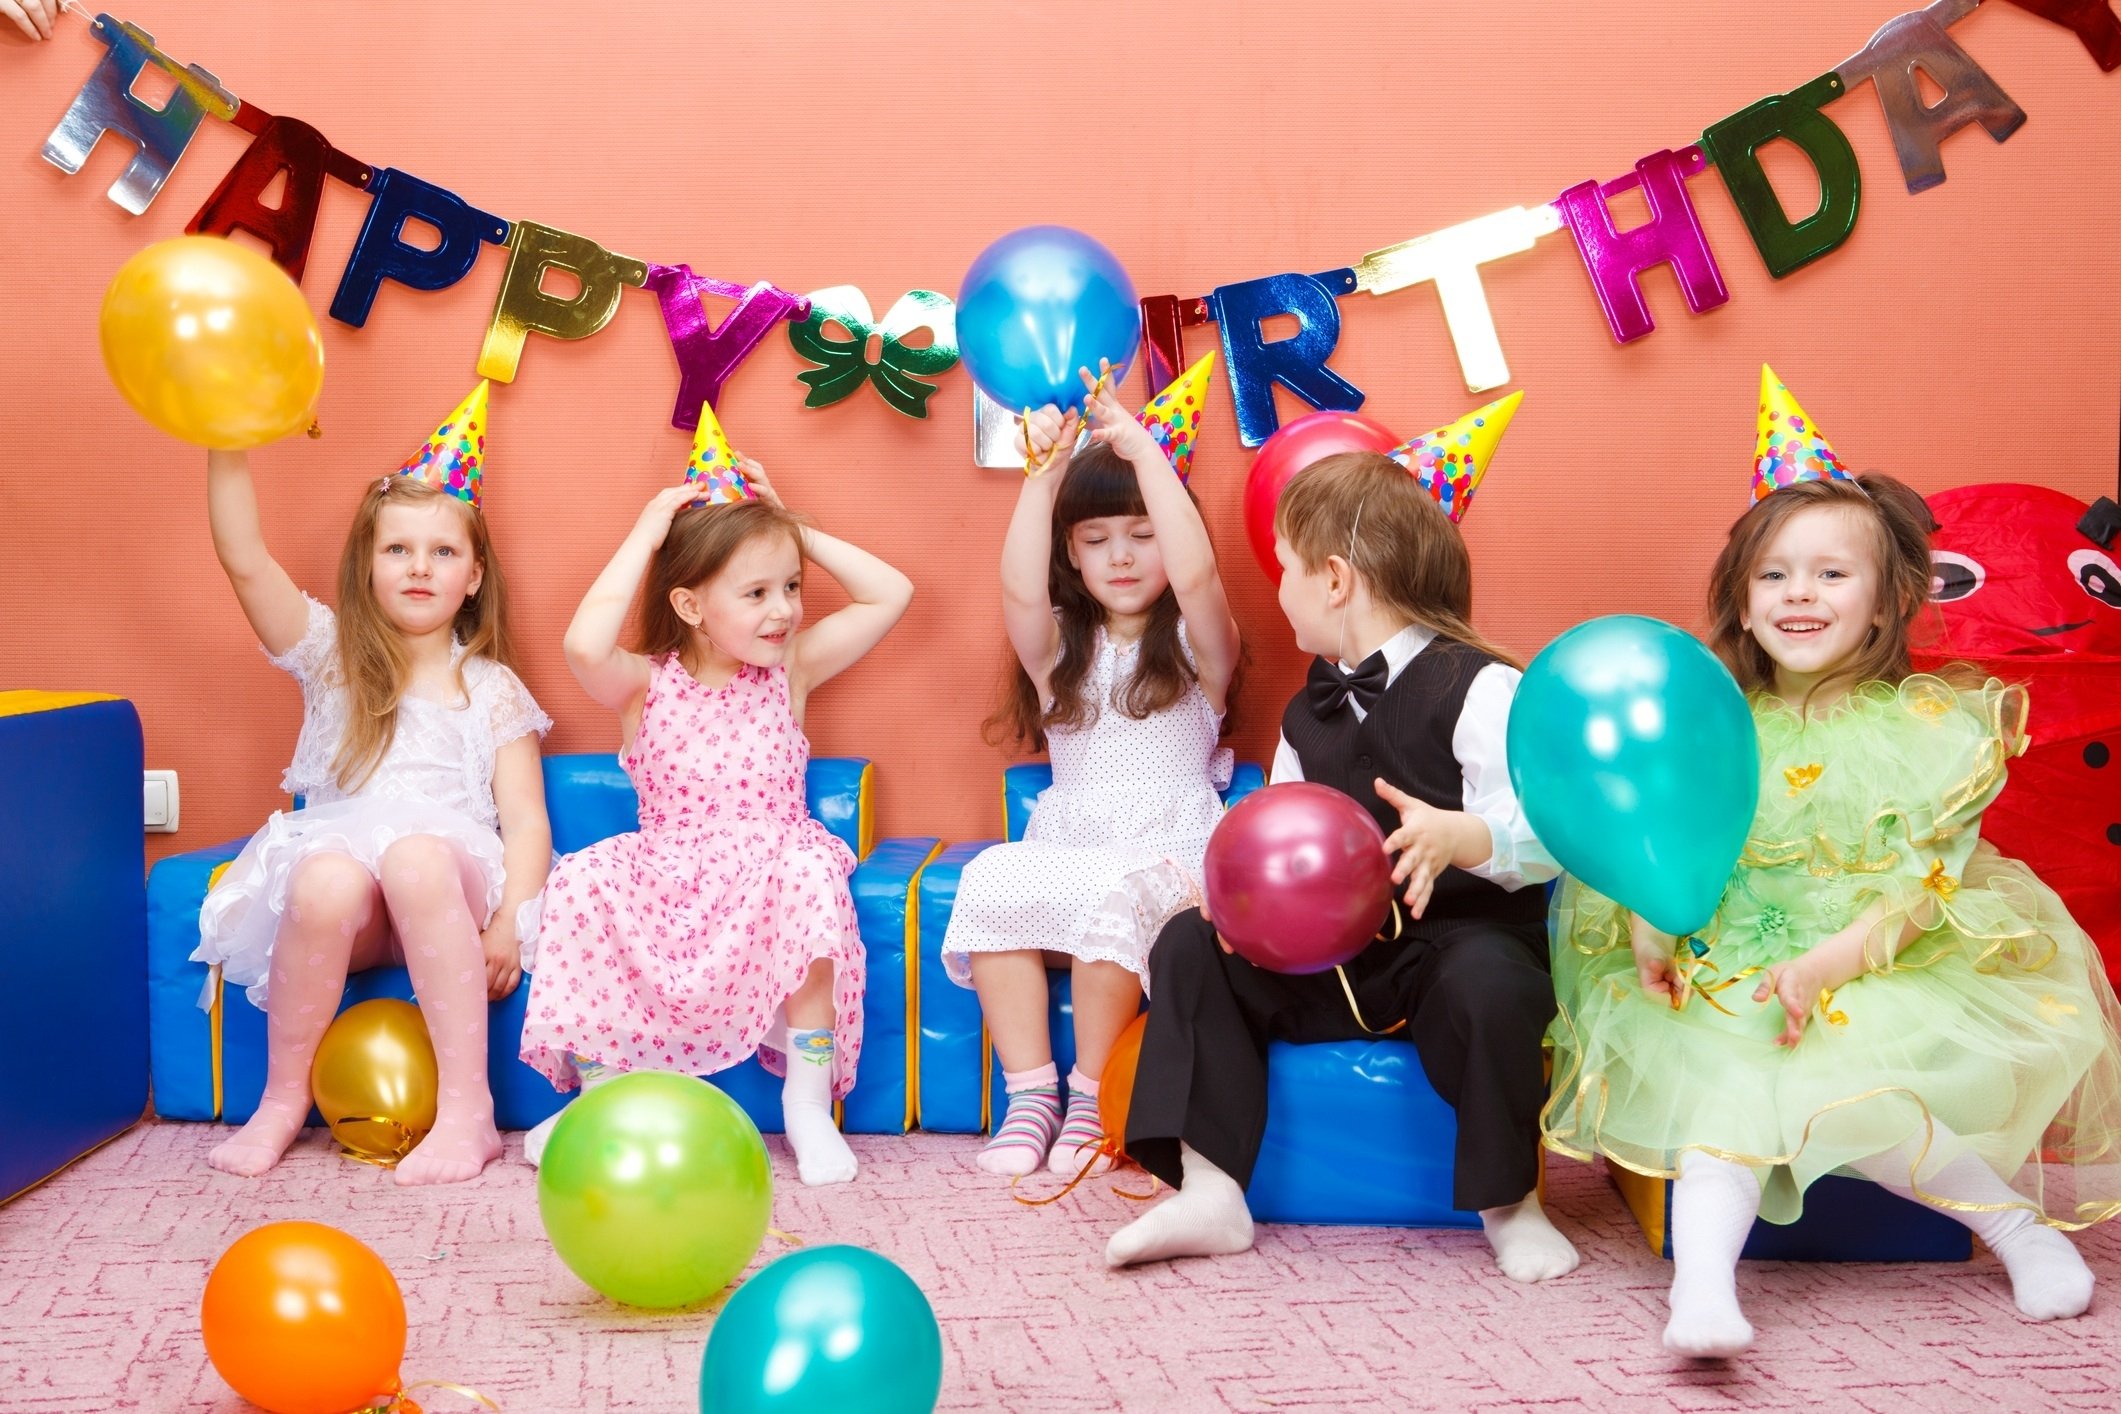 10 Beautiful 12 Year Old Birthday Party Ideas 45 awesome 11 12 year old birthday party ideas birthday inspire 4 2022